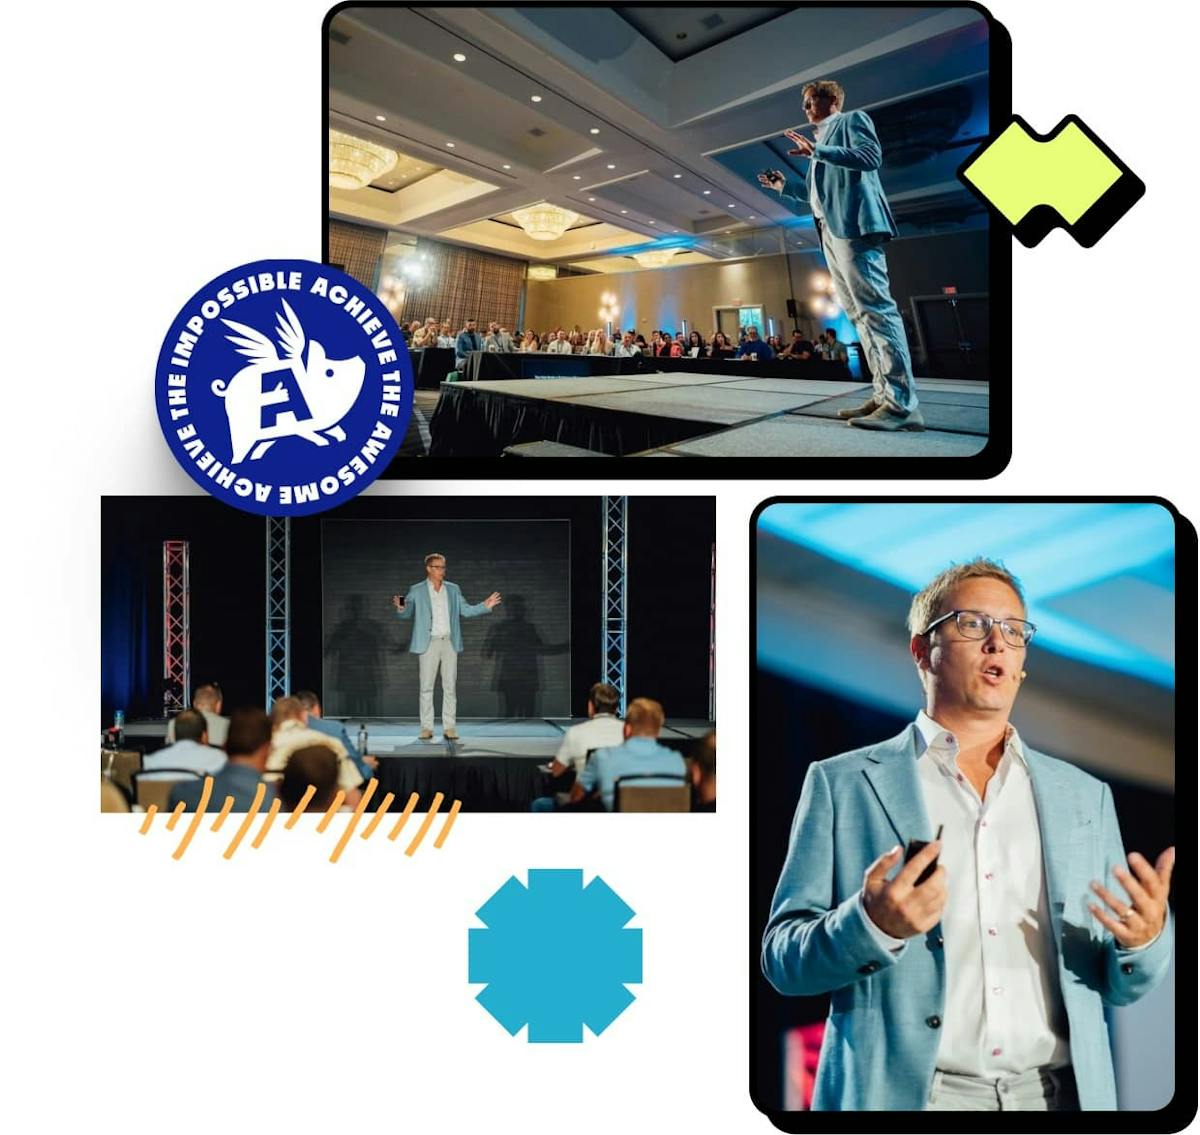 Three photos of Patrick Riddle speaking at a conference, with each photo surronded by decorative graphics